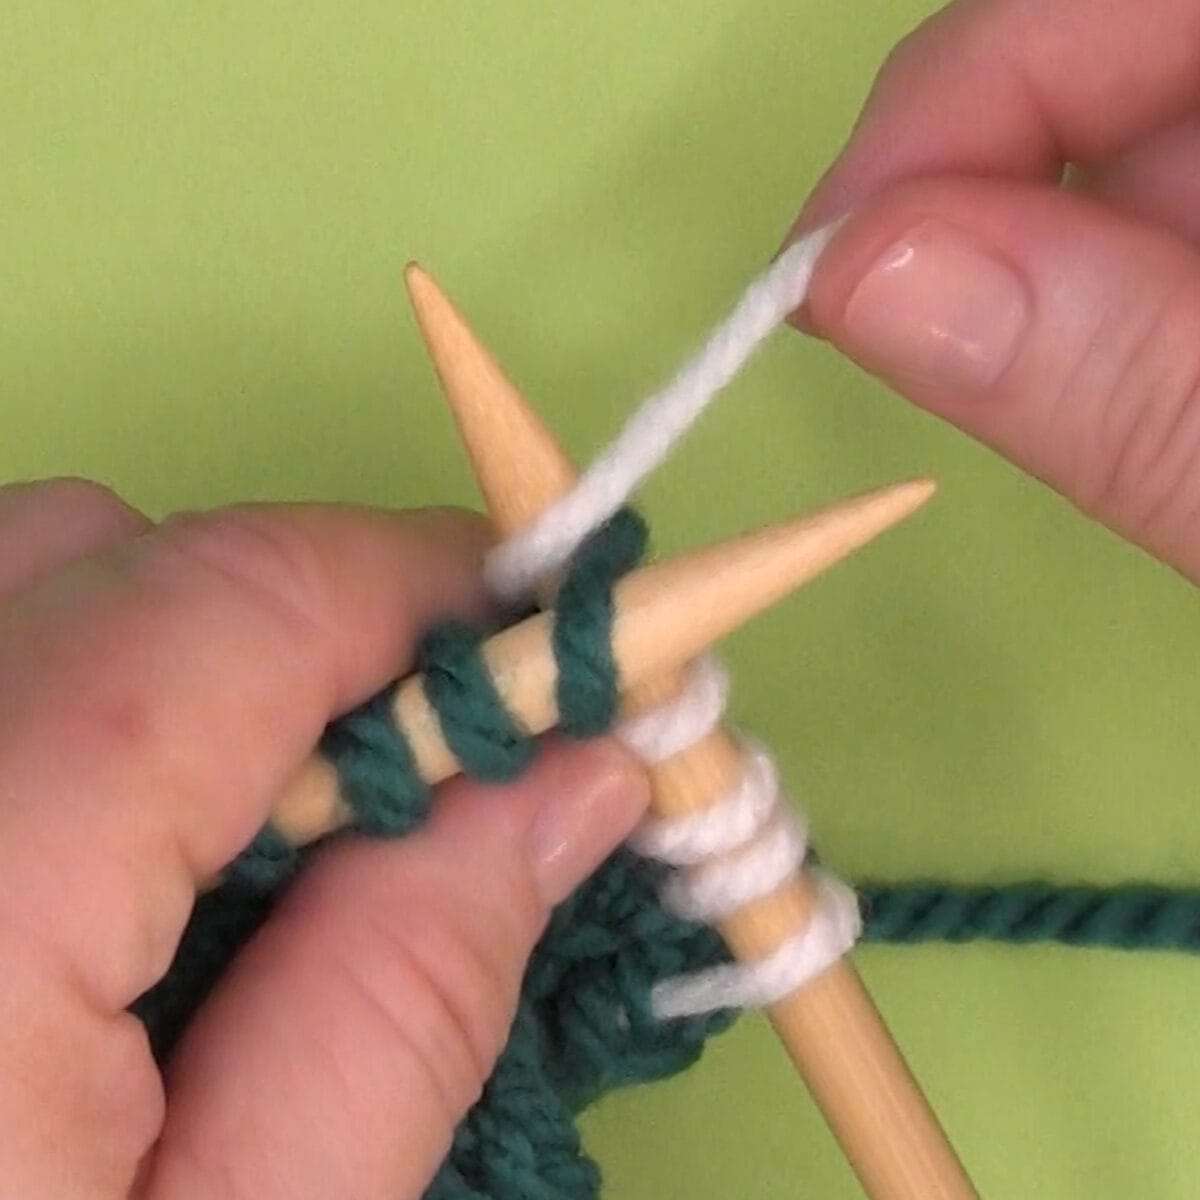 Right-handed demonstration of wrapping yarn counterclockwise around needle.